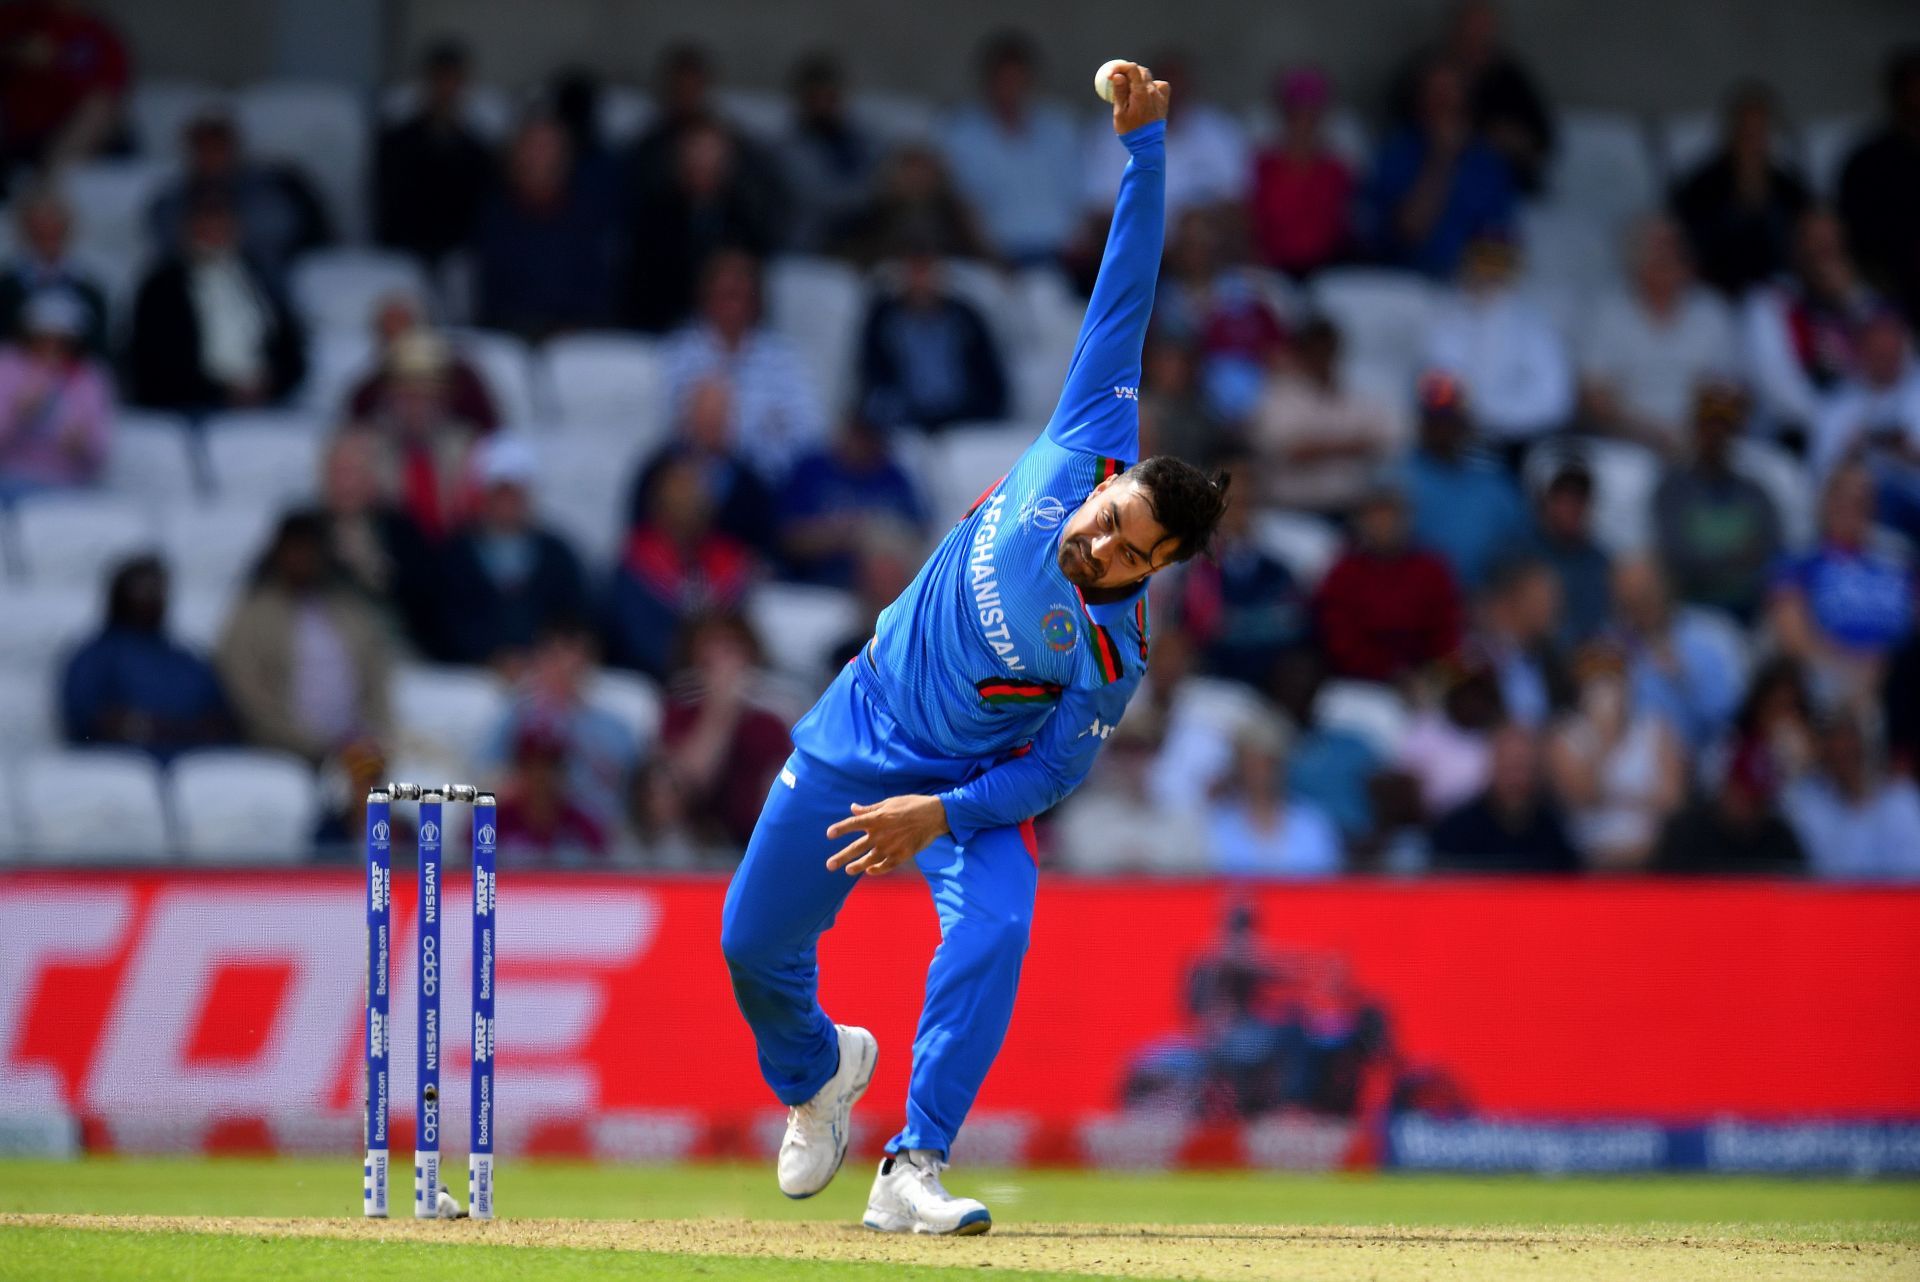 Rashid Khan&#039;s performances will be key to Afghanistan&#039;s chances at T20 World Cup